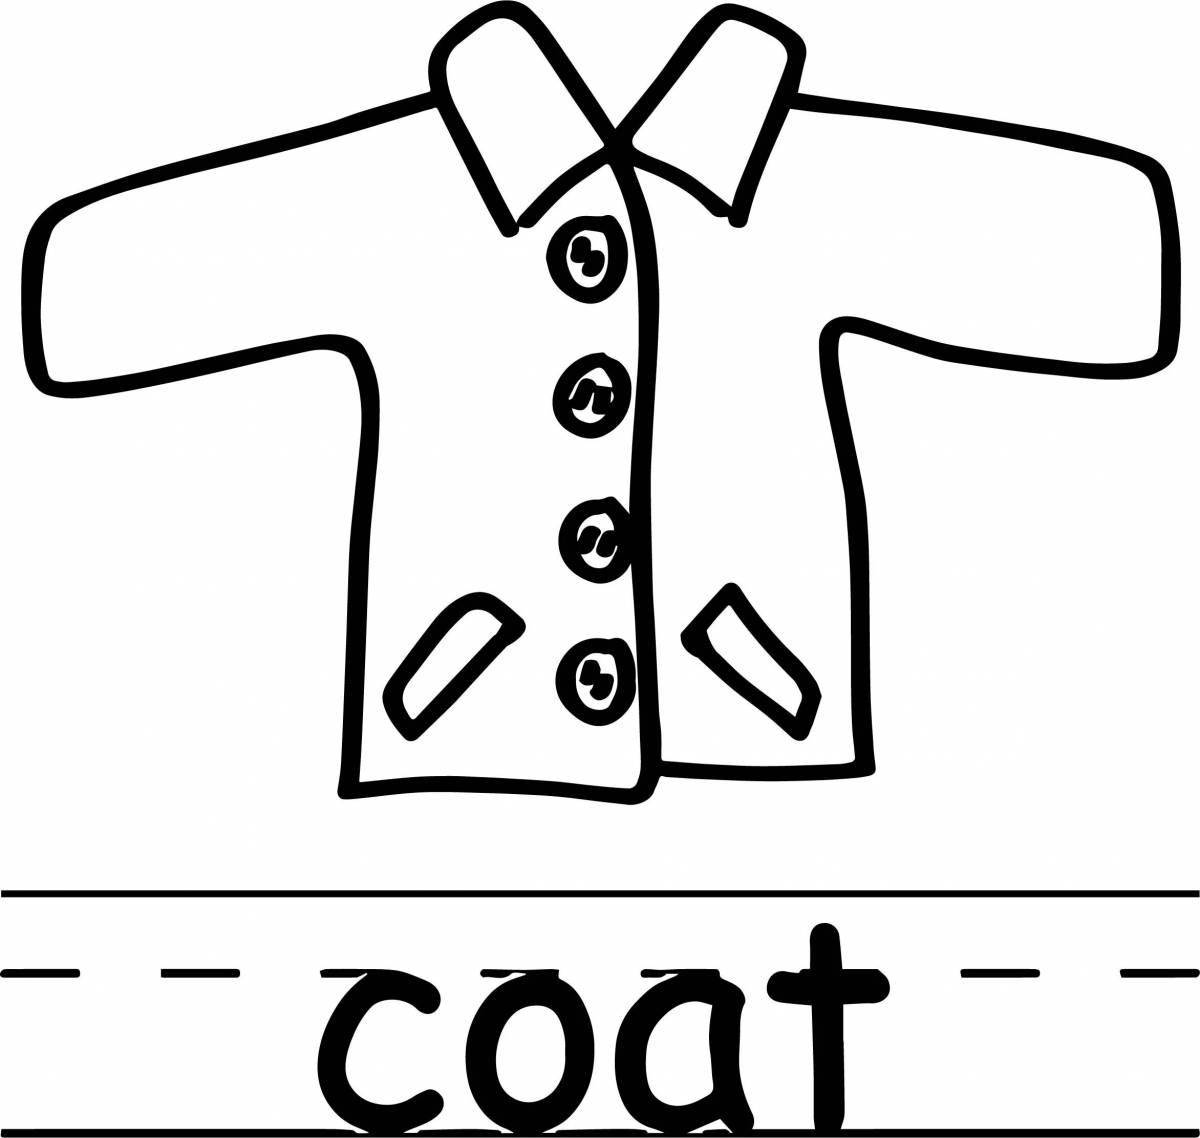 Creative jacket coloring for 3-4 year olds